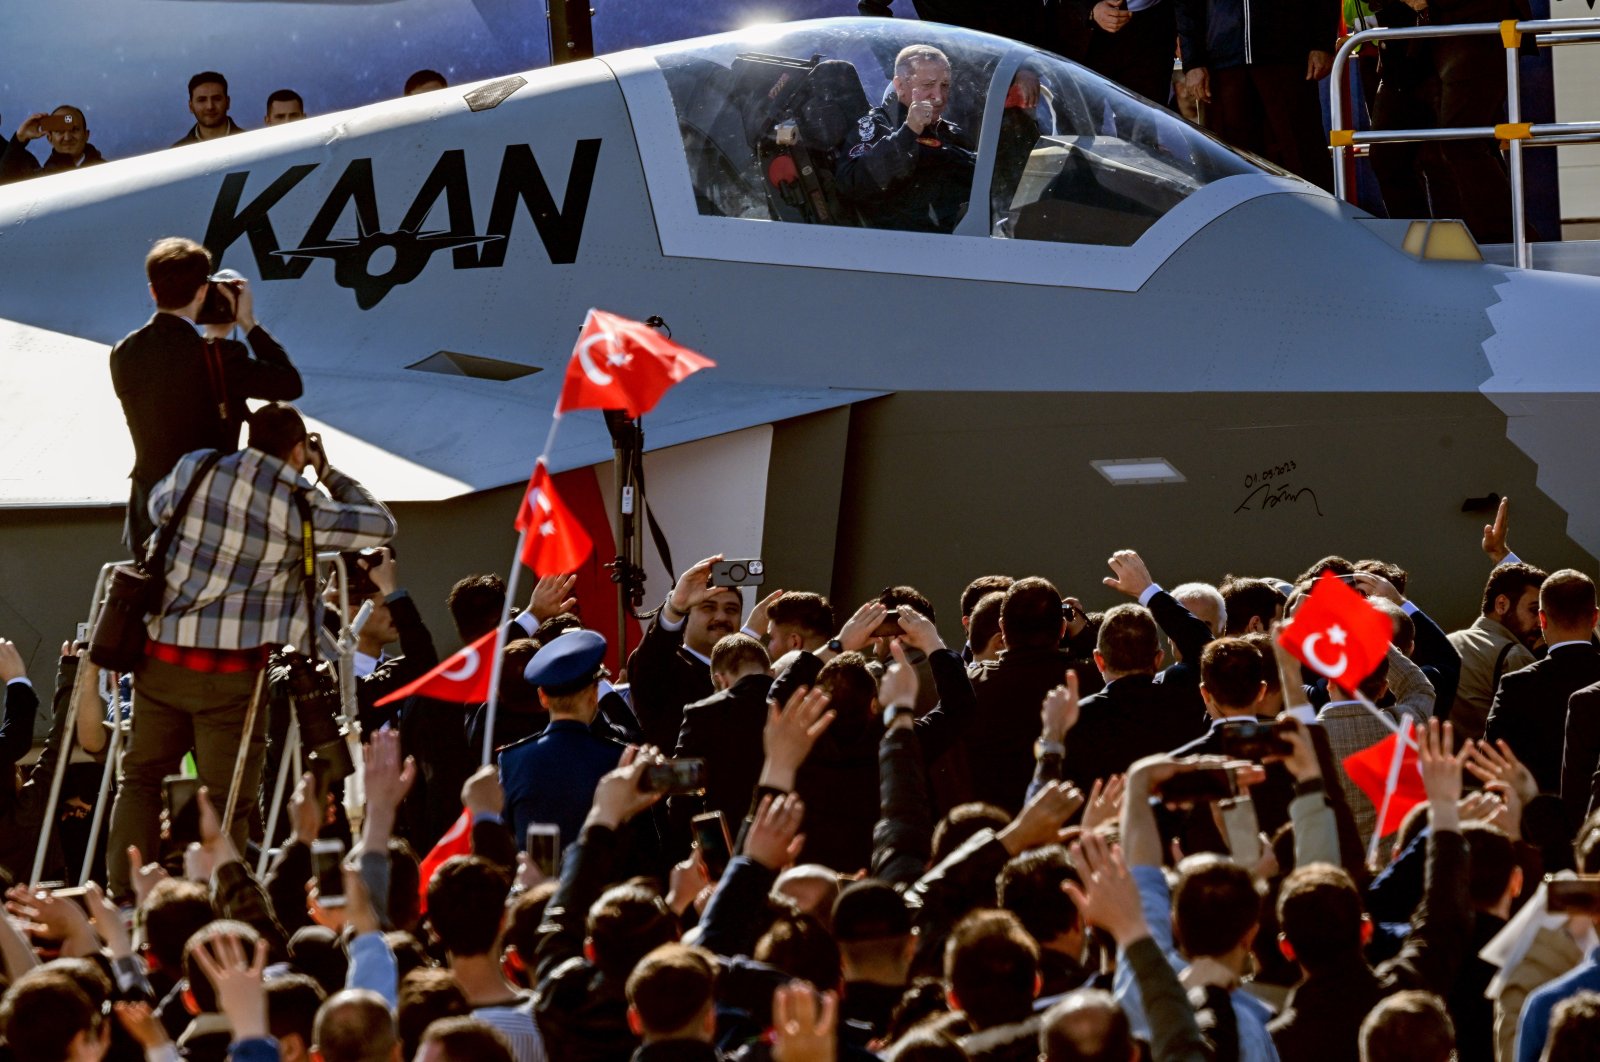 President Recep Tayyip Erdoğan sits inside Türkiye’s domestically developed 5th-generation fighter jet, named "KAAN," as he attends the "Century of the Future" event at the Turkish Aerospace Industries (TAI) headquarters in the Kahramankazan district of Ankara, Türkiye, May 1, 2023. (AA Photo)